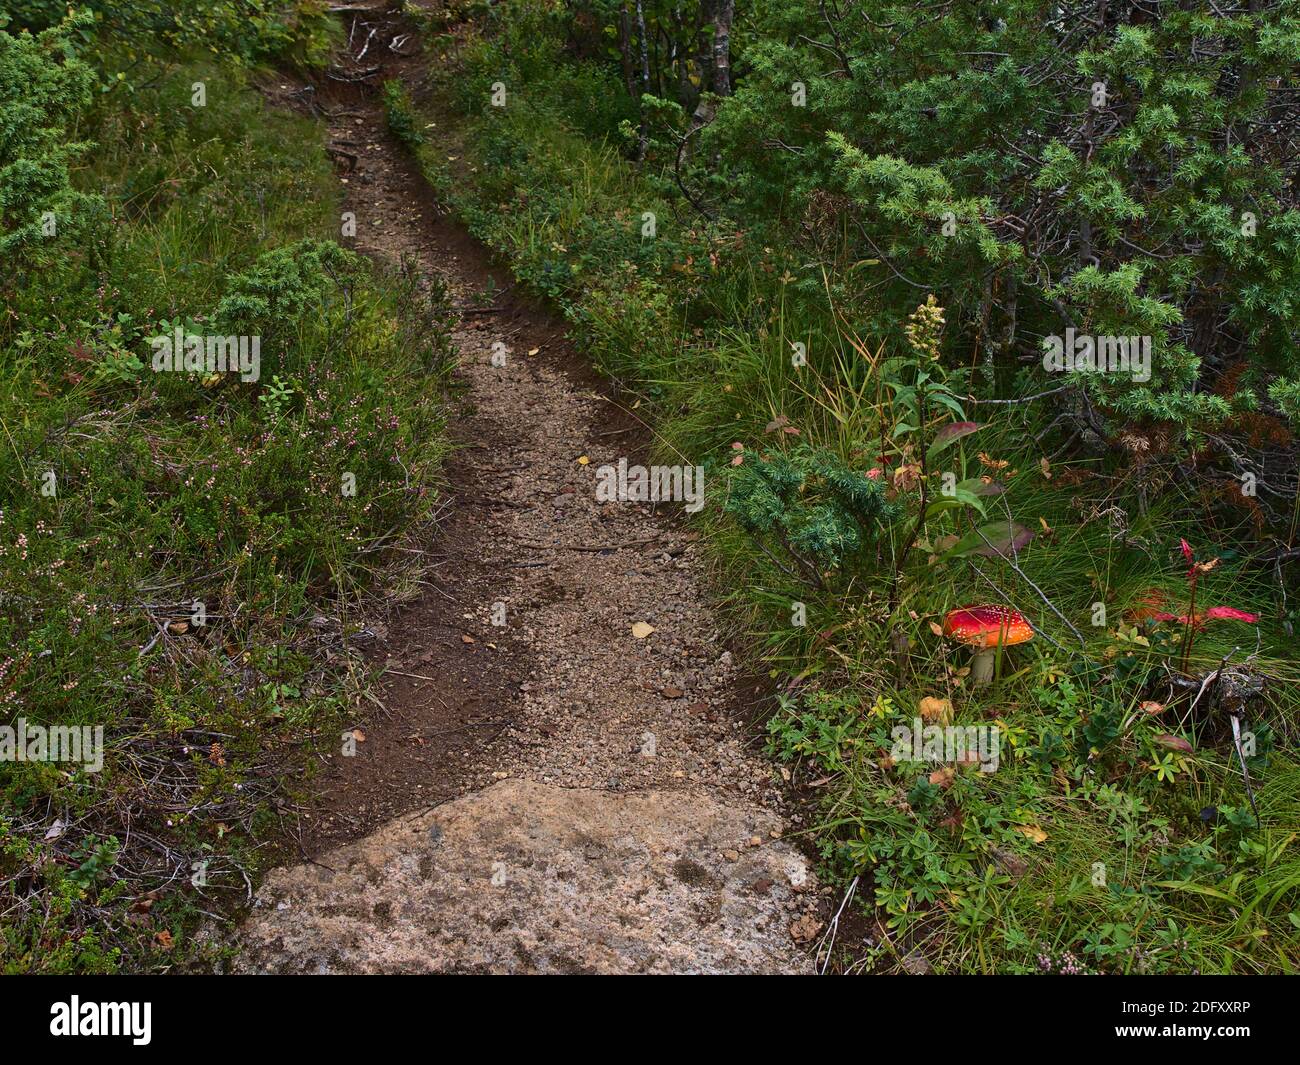 Hiking trail in forest near Digermulen, Hinnøya island, Vesterålen, Norway with green vegetation and red colored poisonous fly agaric mushroom. Stock Photo